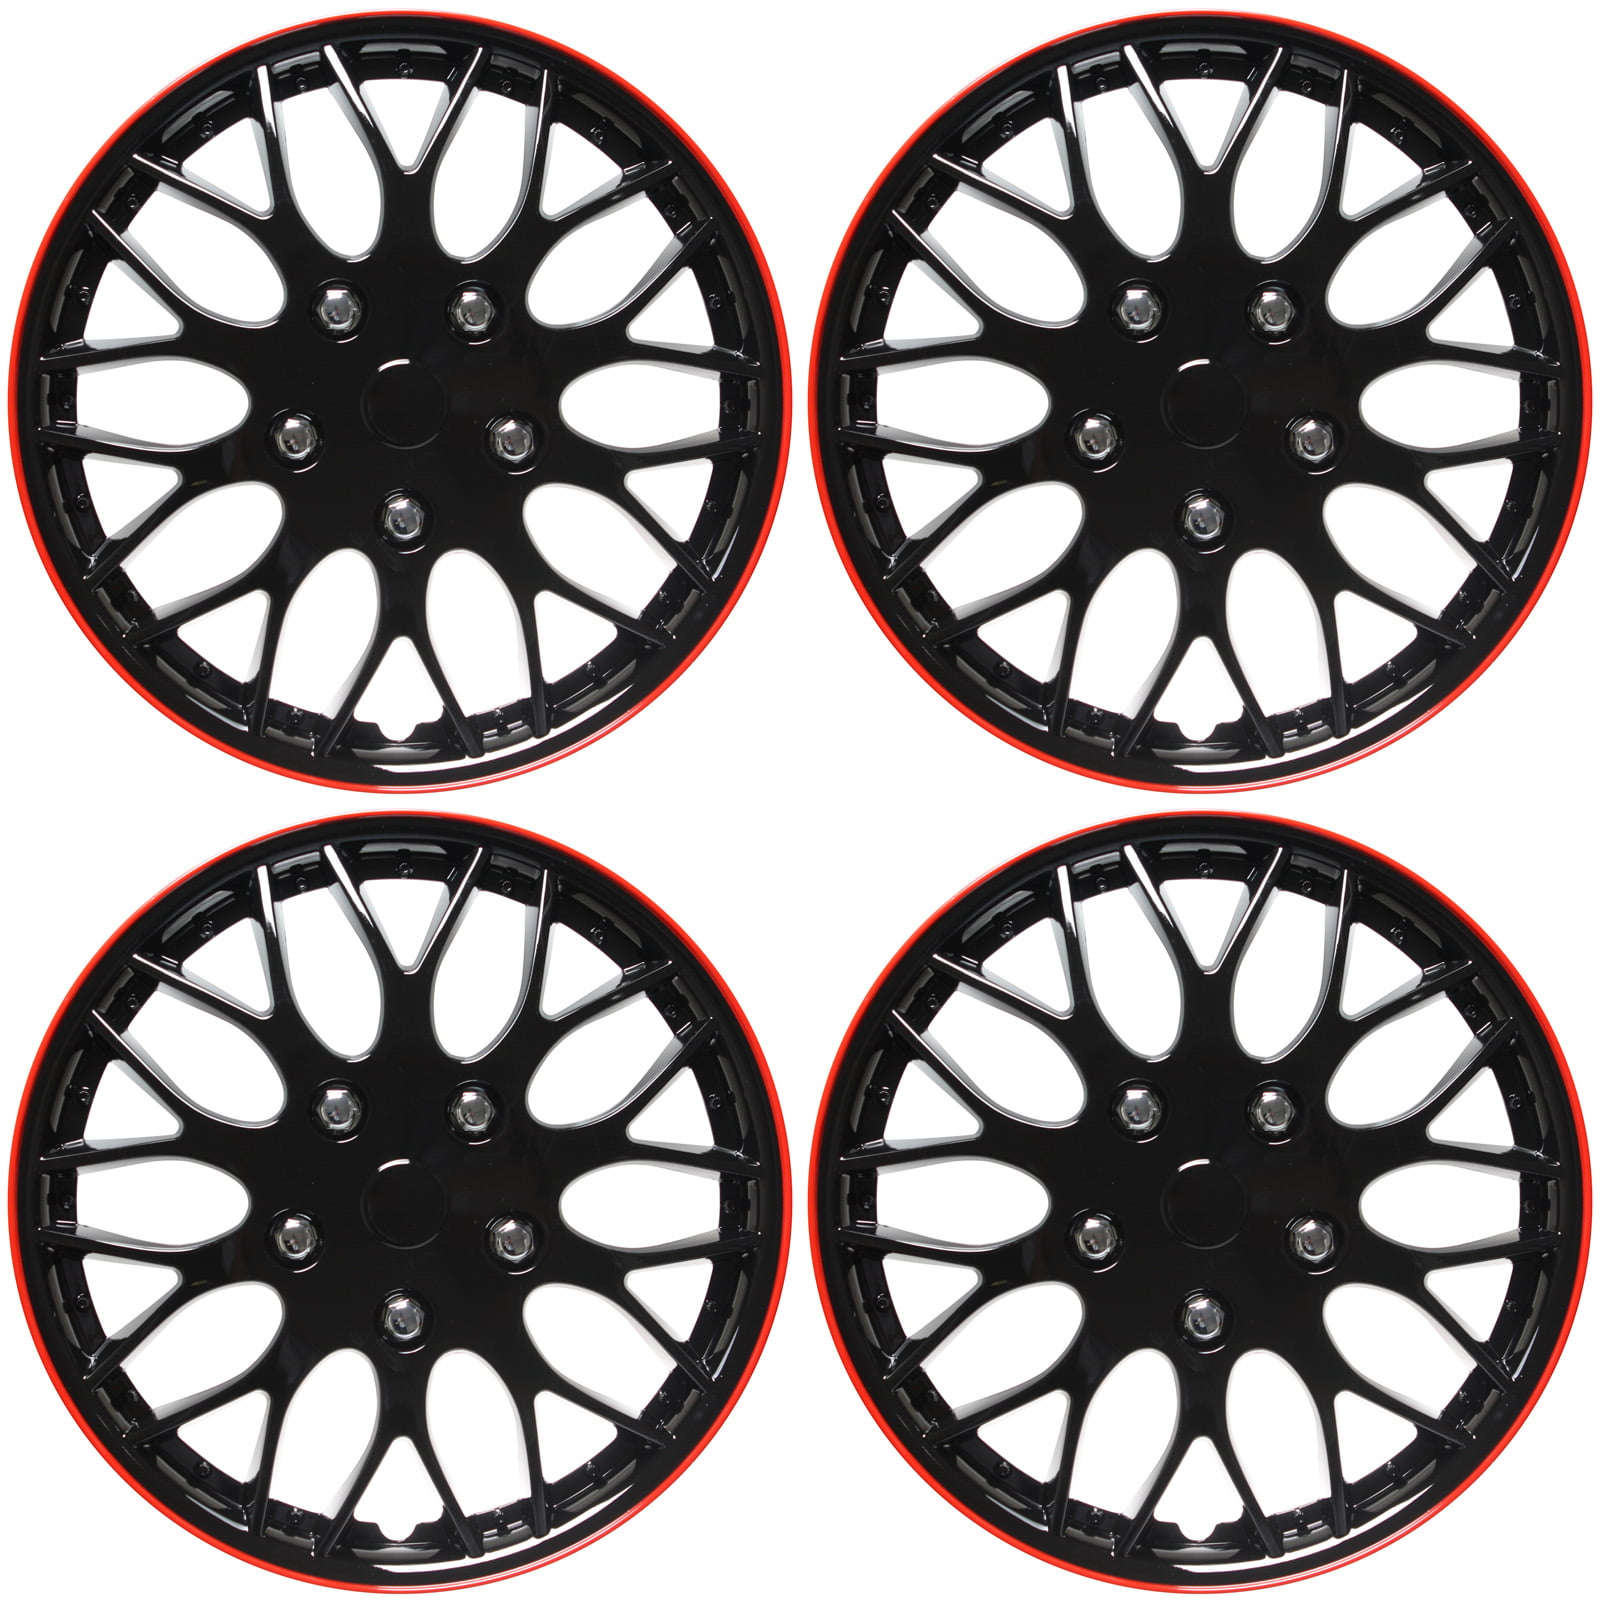 Aftermarket 14 Inch Ice Black W/Red Trim Hub Caps Wheel Covers Set of 4 Cover Trend 